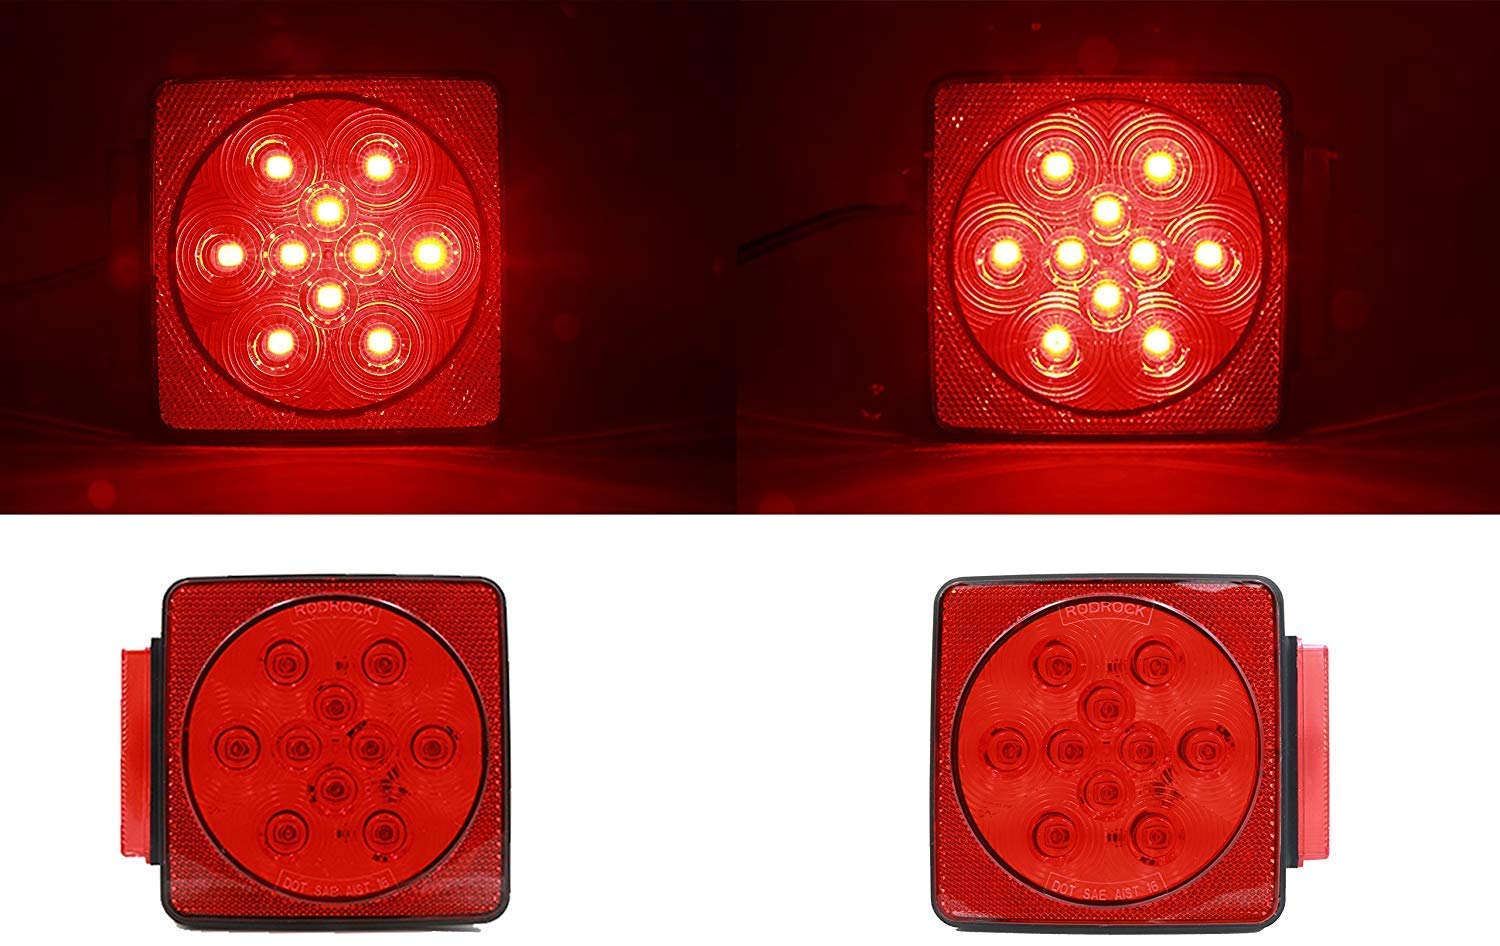 Deluxe 12V LED Submersible Rear Trailer Light Kit for trailers under 80 inches in width-8059